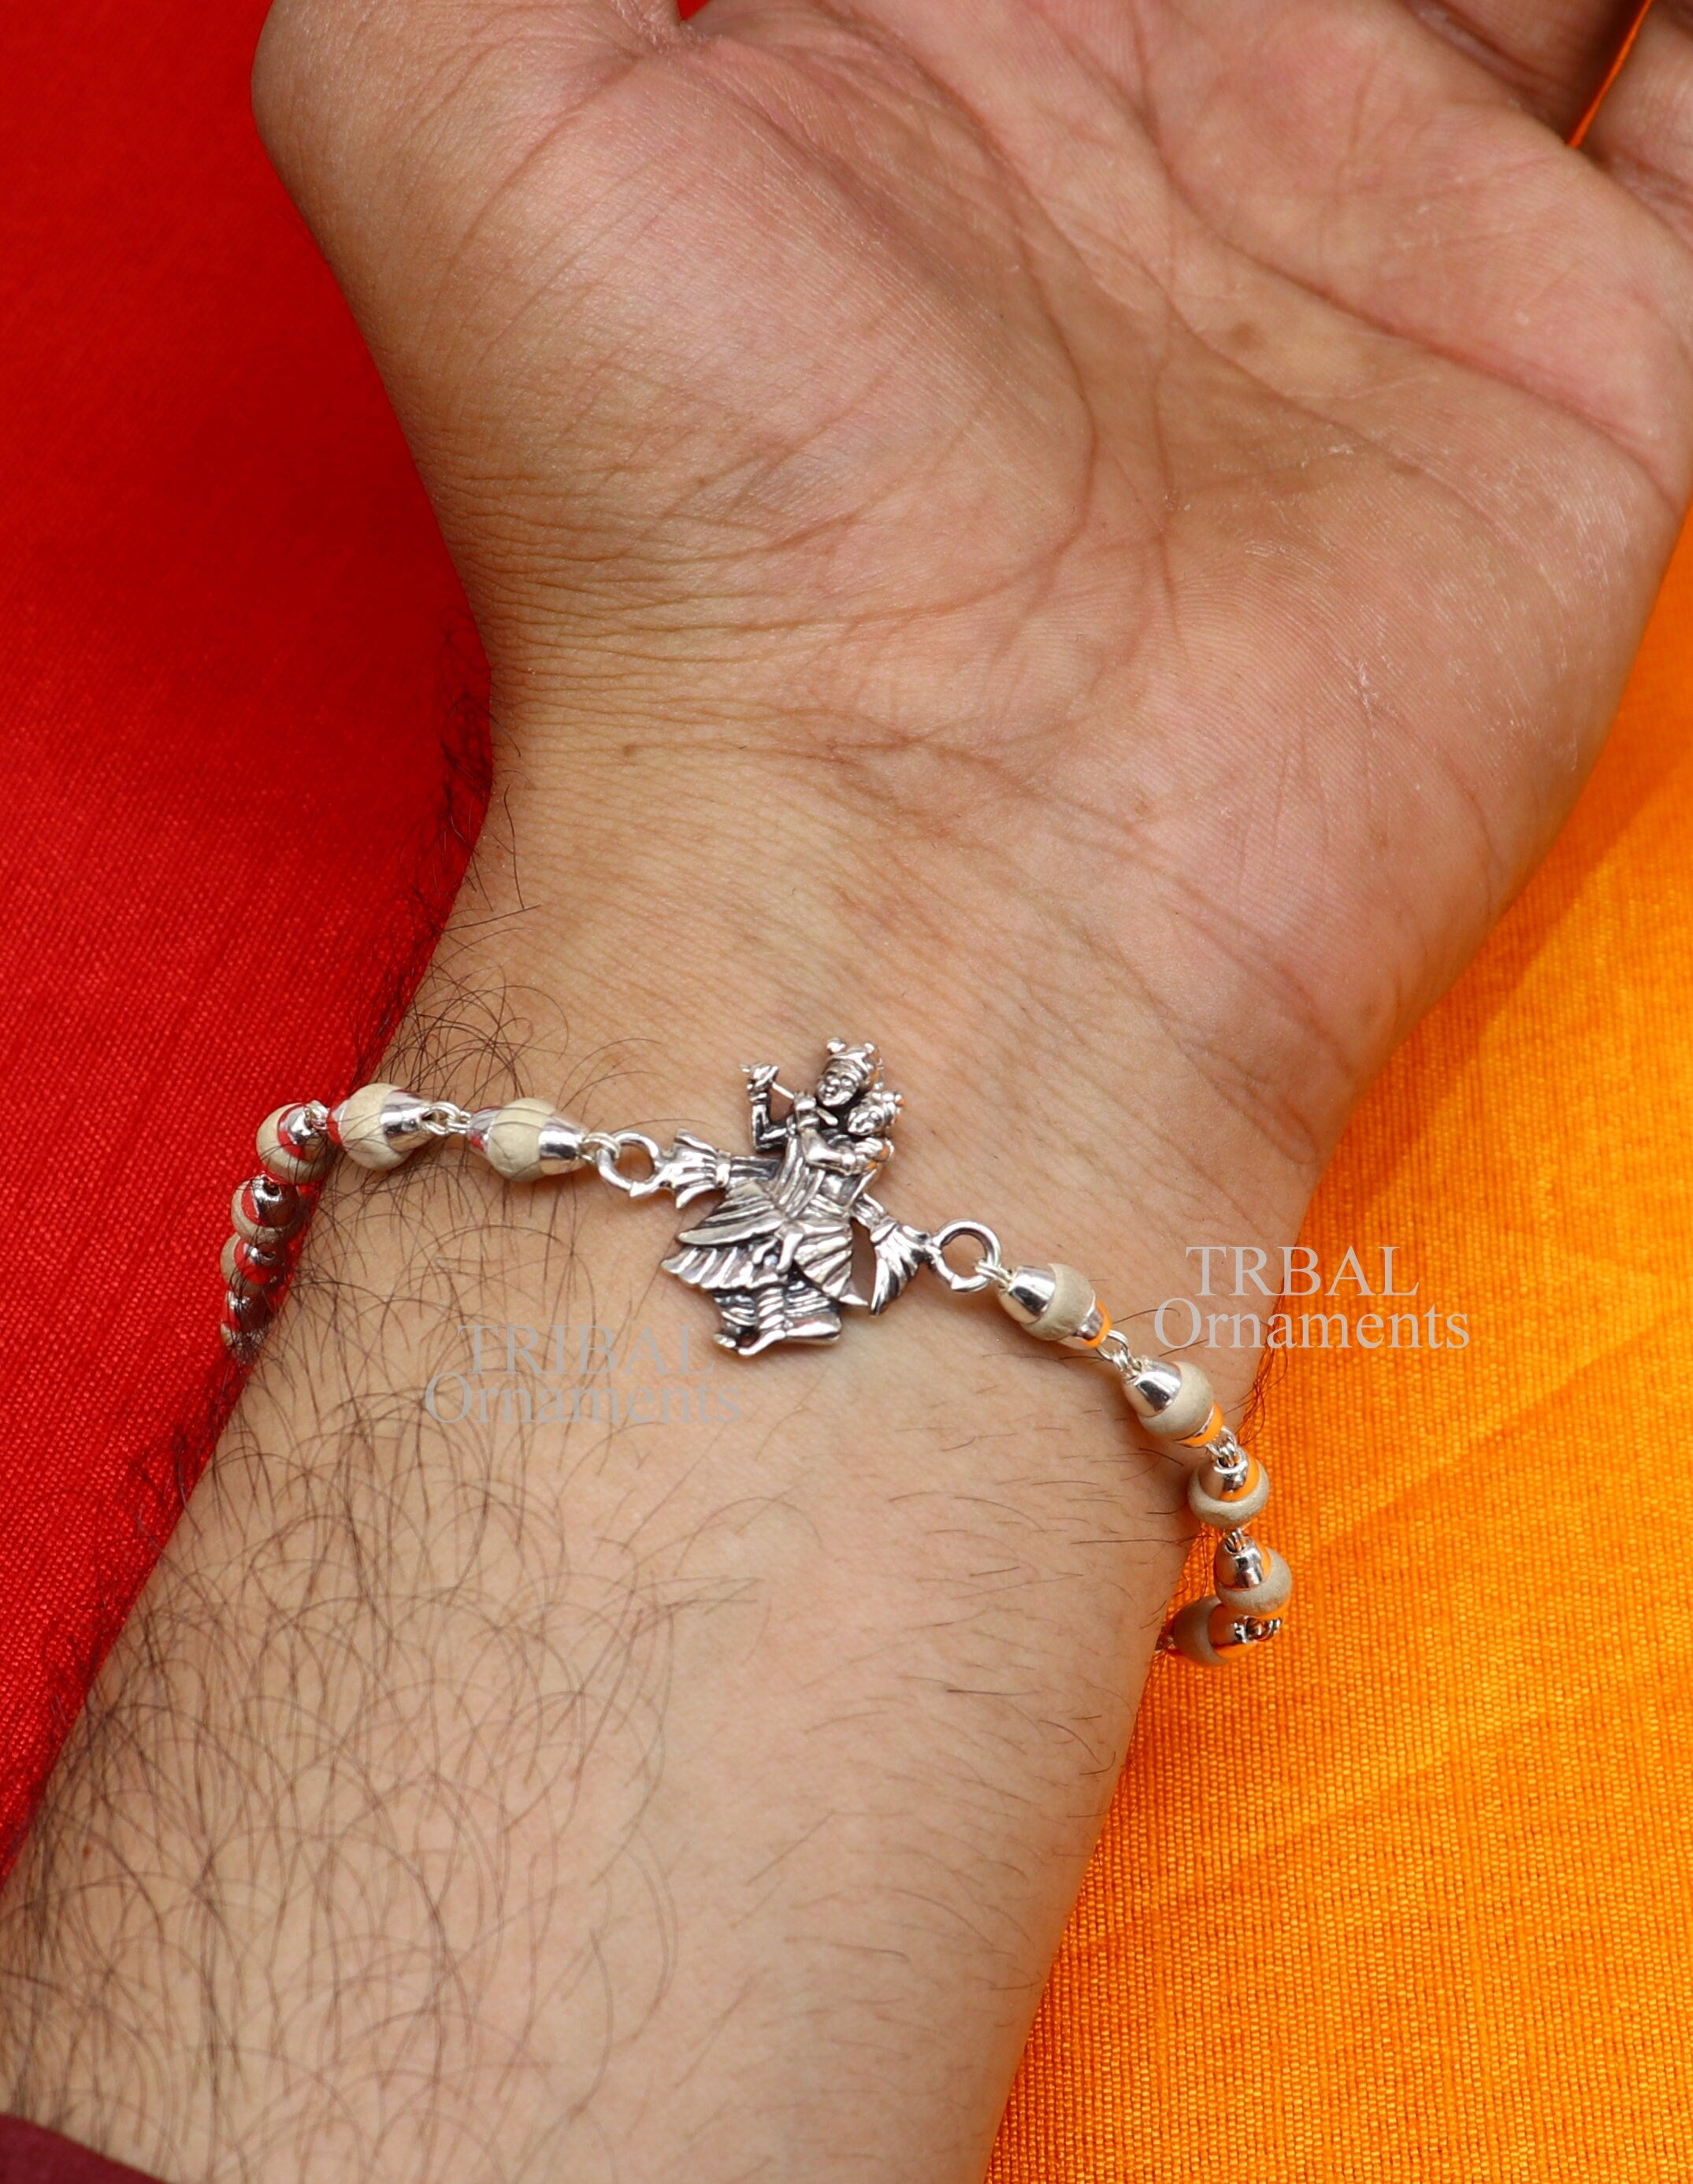 Buy quality 925 sterling silver cZ diamond bracelet for ladies in Ahmedabad